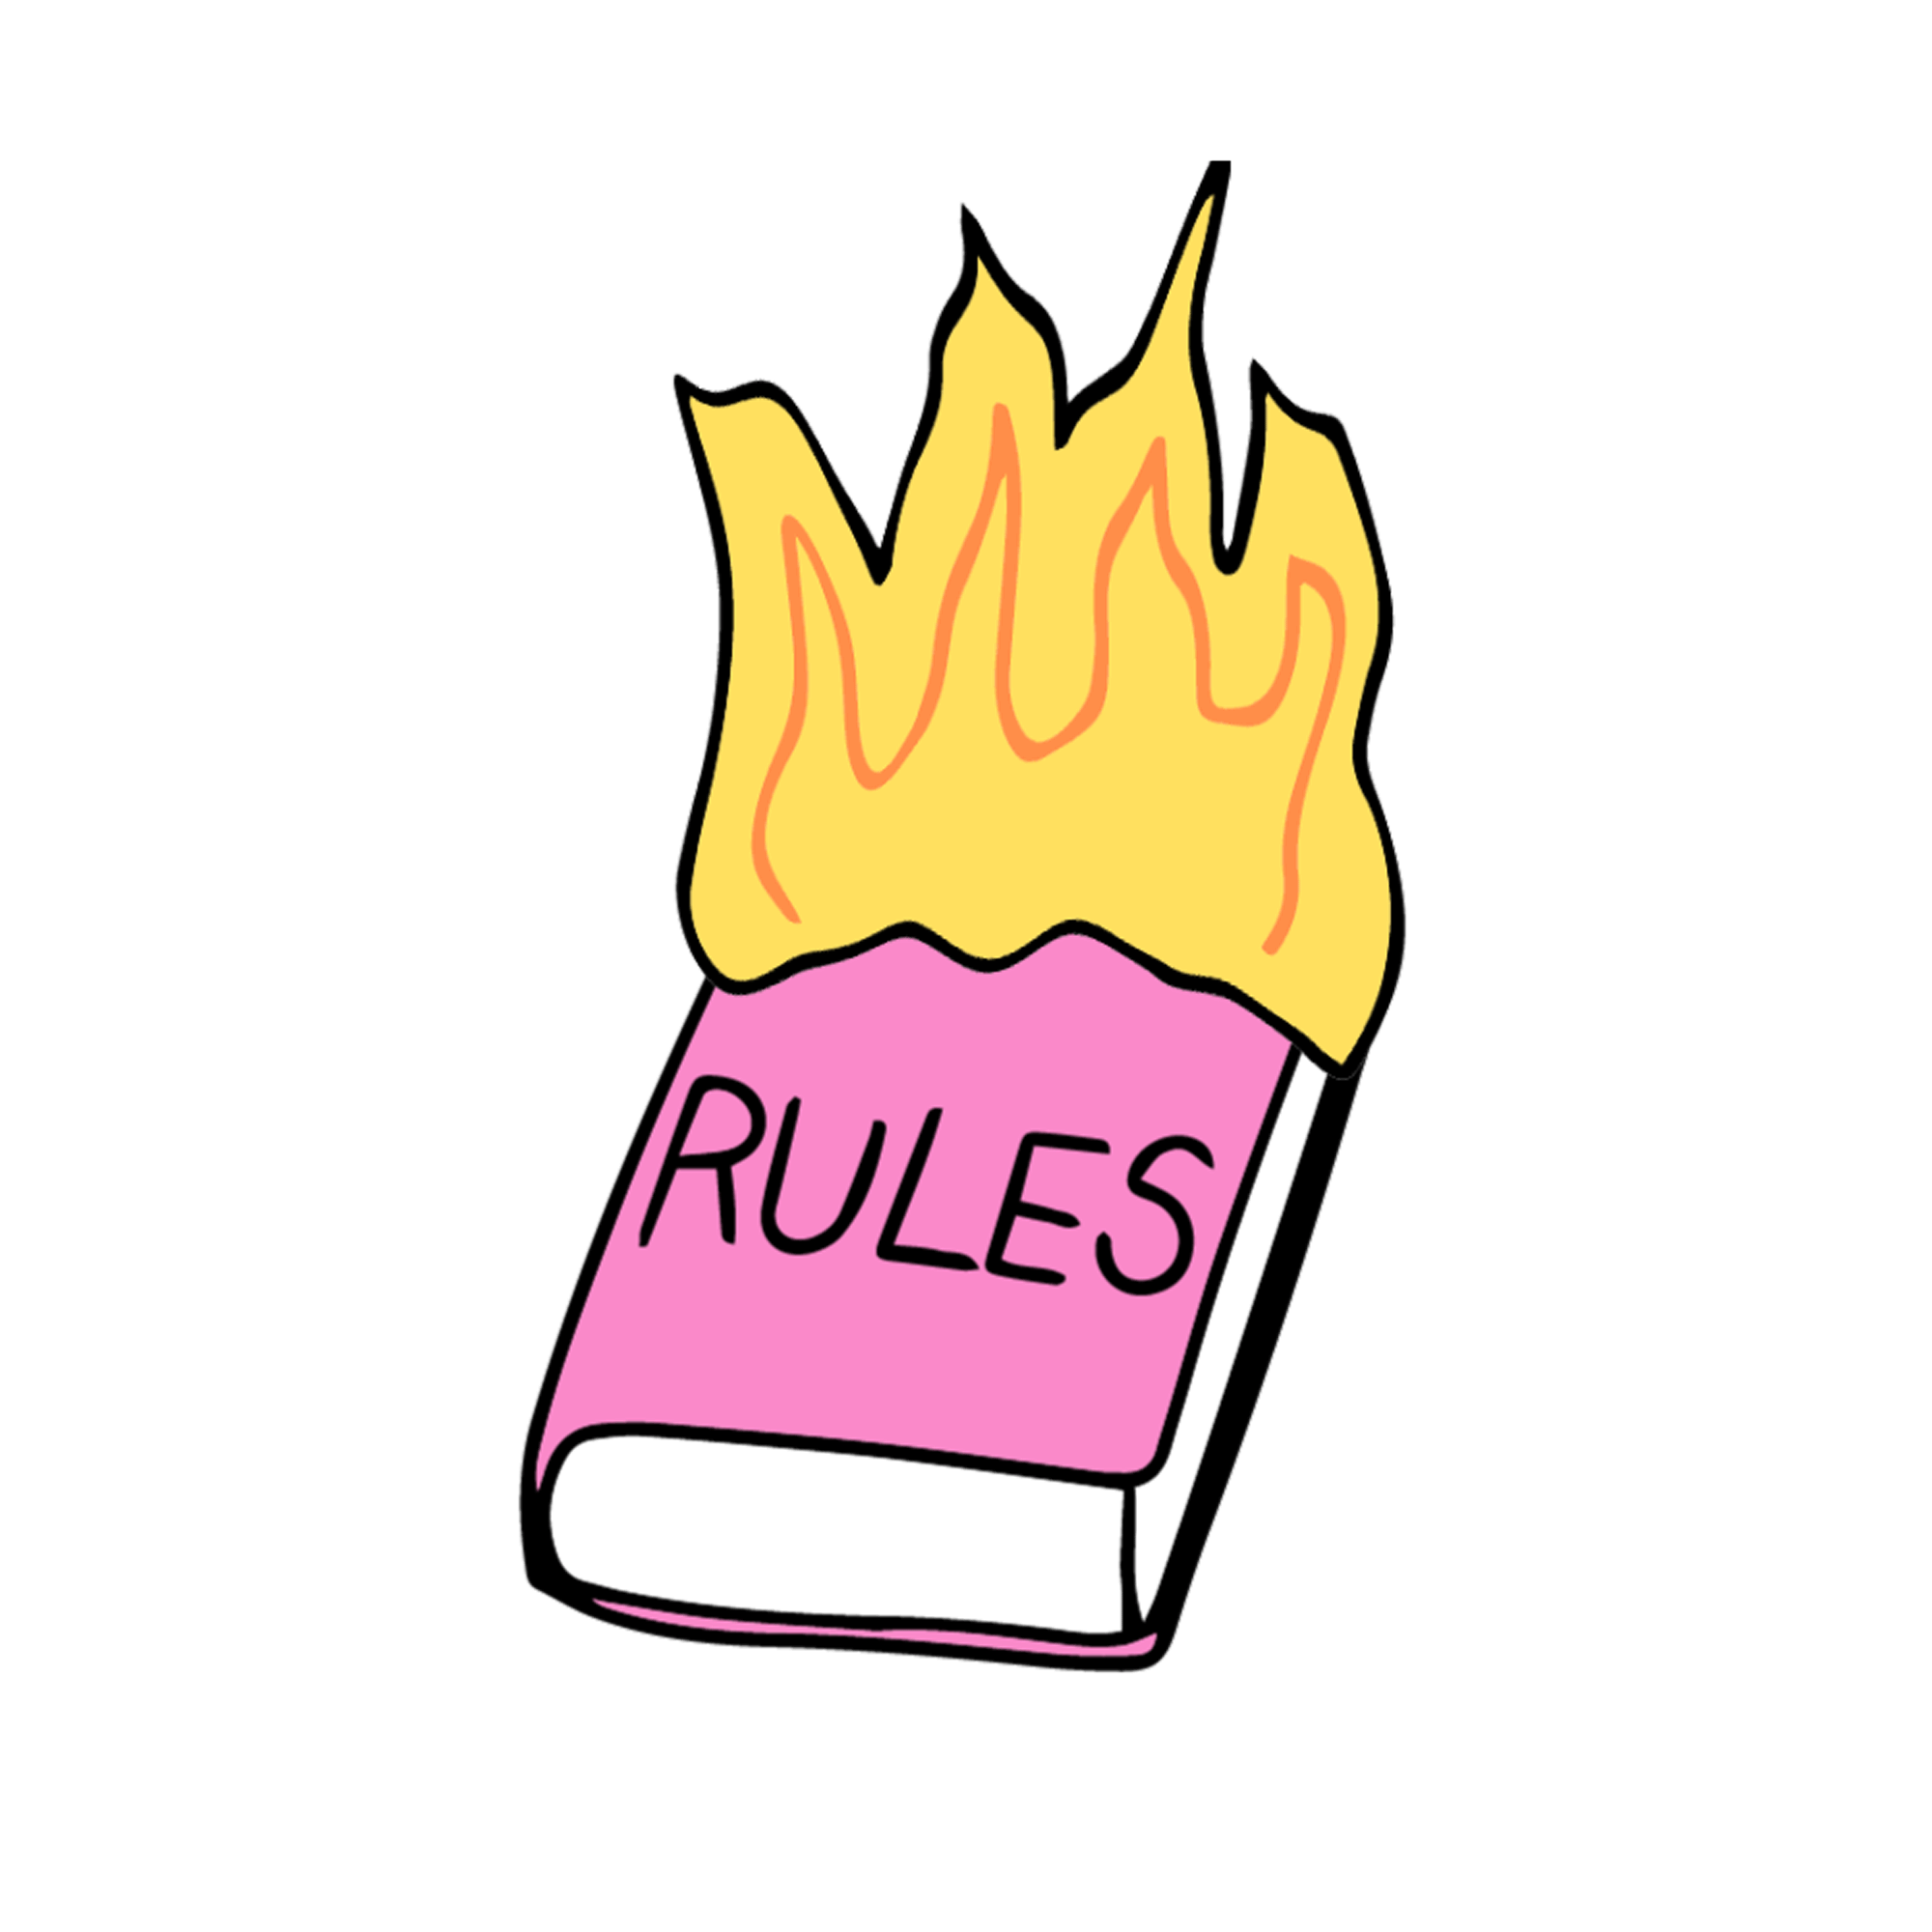 A rulebook on fire